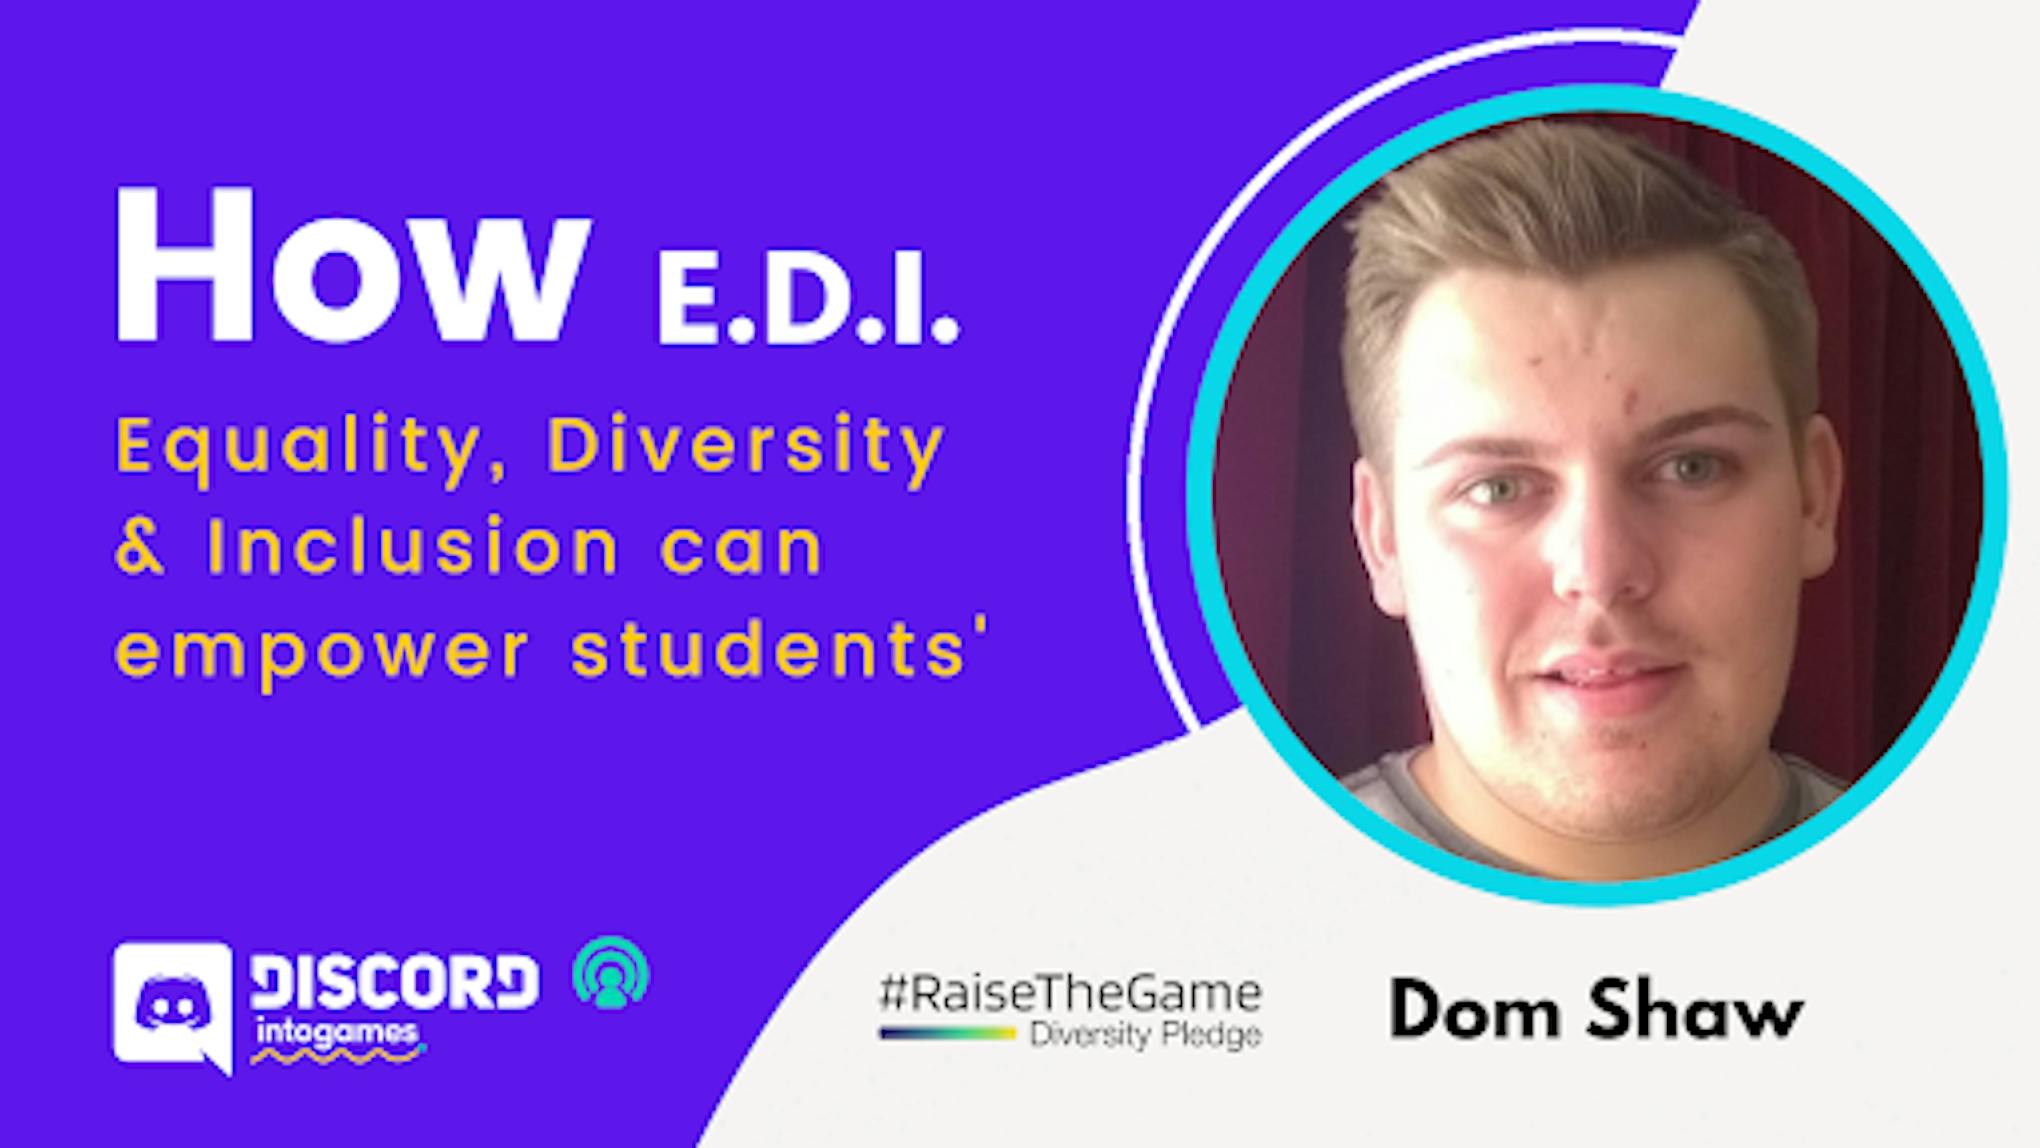 How E.D.I. Equality, Diversity & Inclusion can Empower Students 